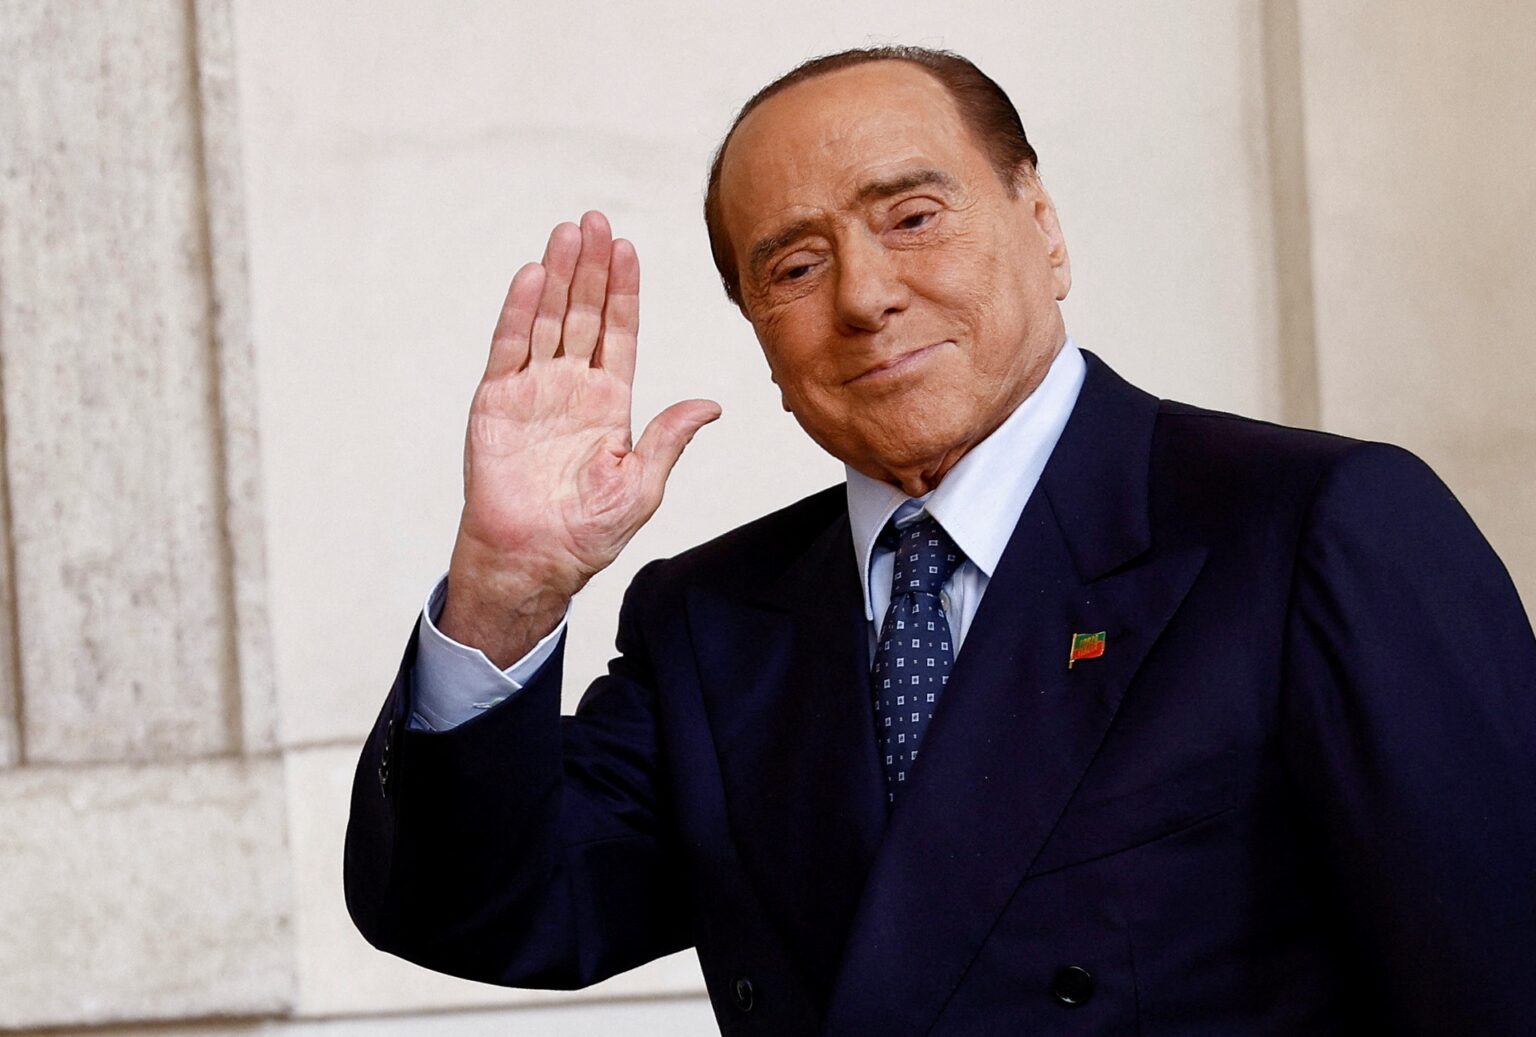 Italy’s former Prime Minister Berlusconi fired